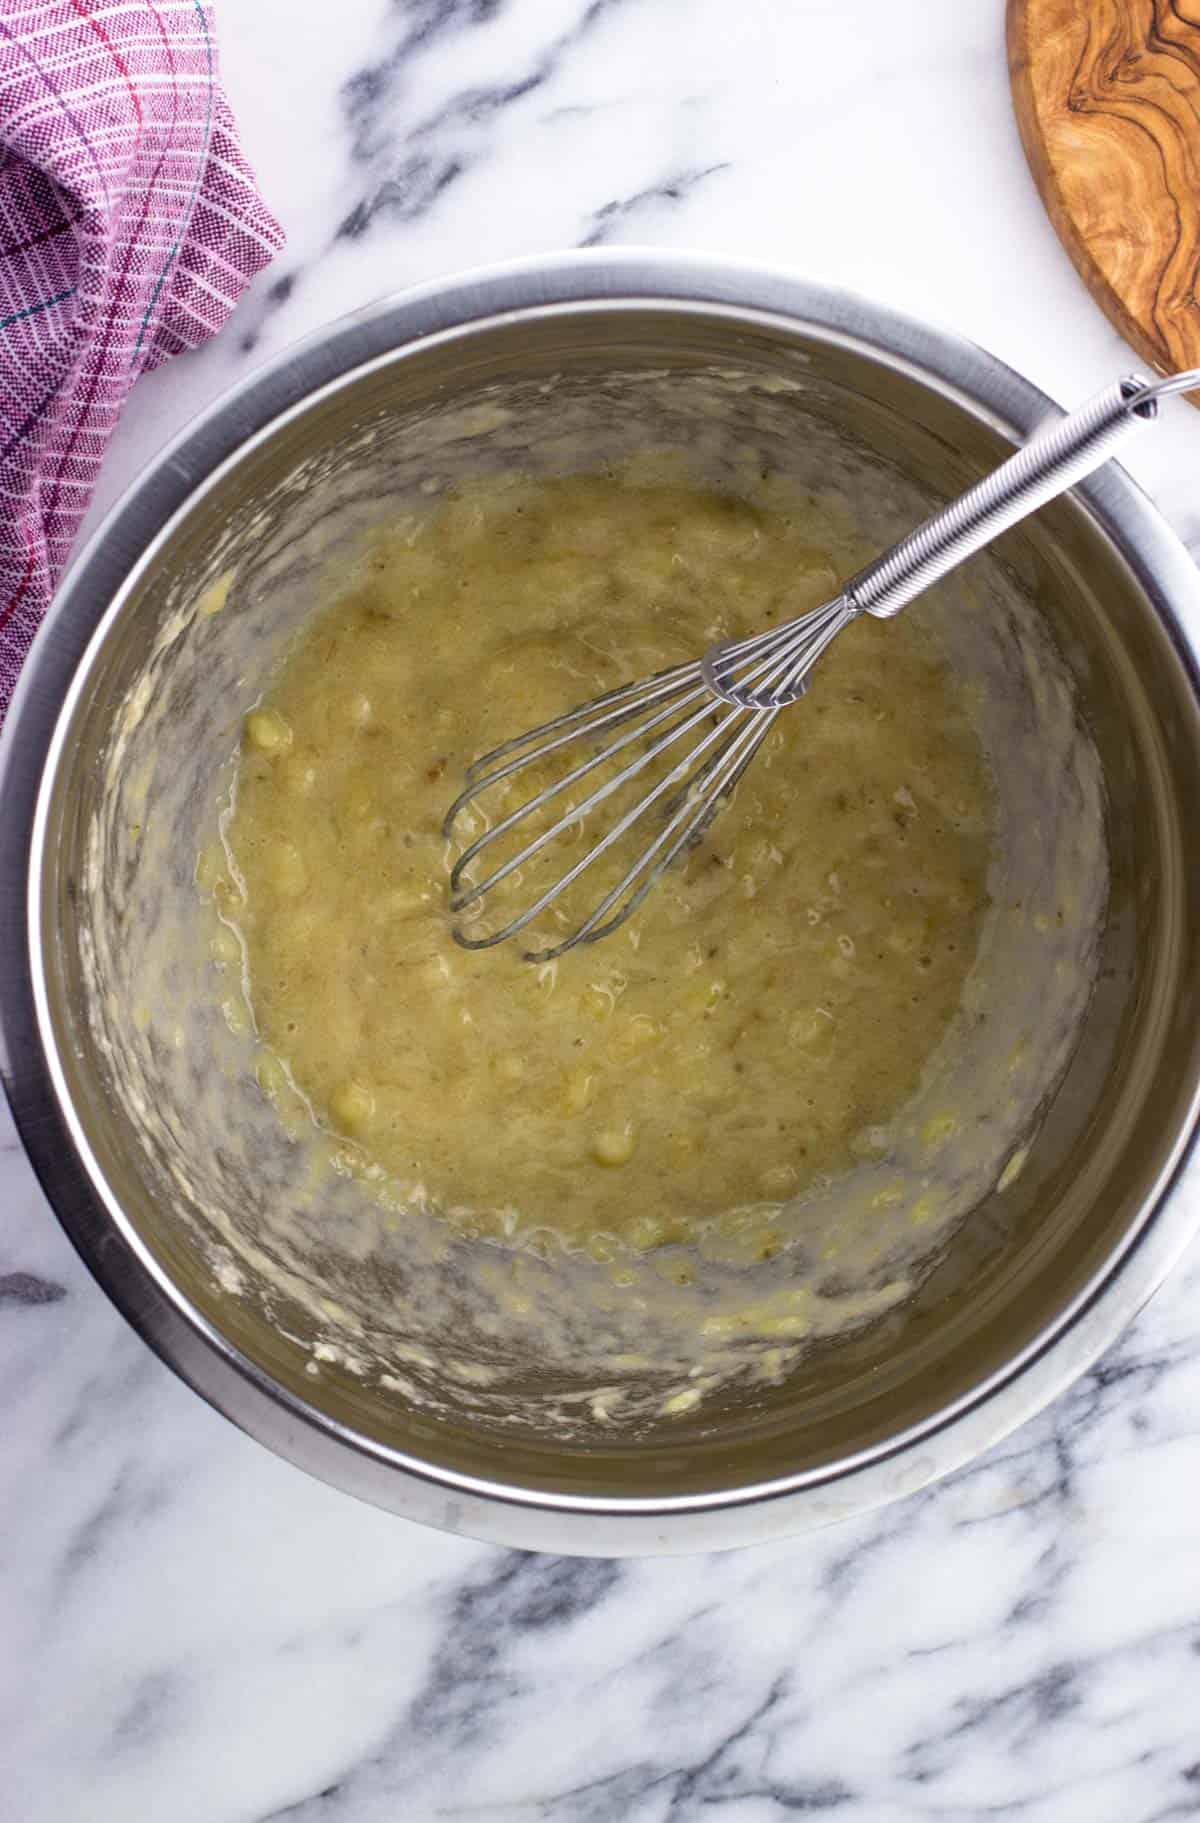 Mashed banana in a bowl with a whisk.